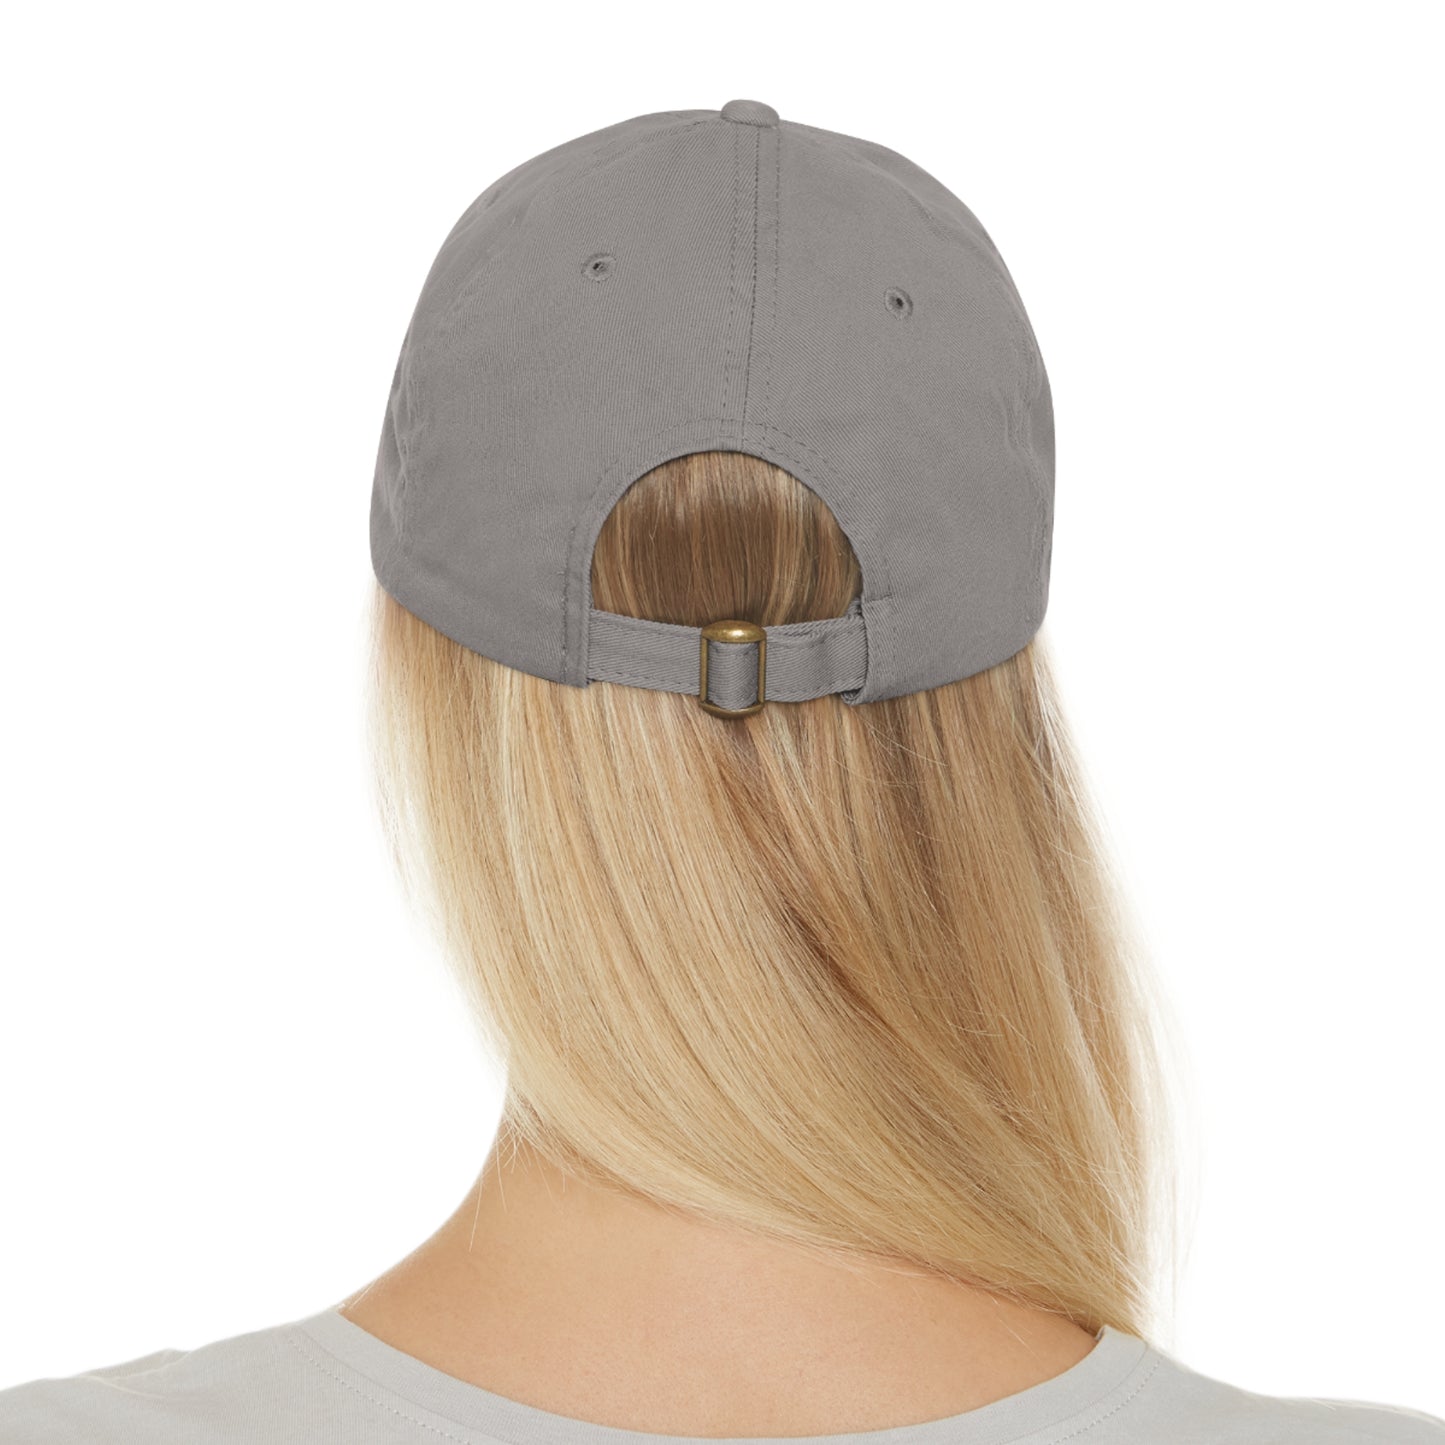 Death's Head Moth Dad Hat with Leather Patch (Round)